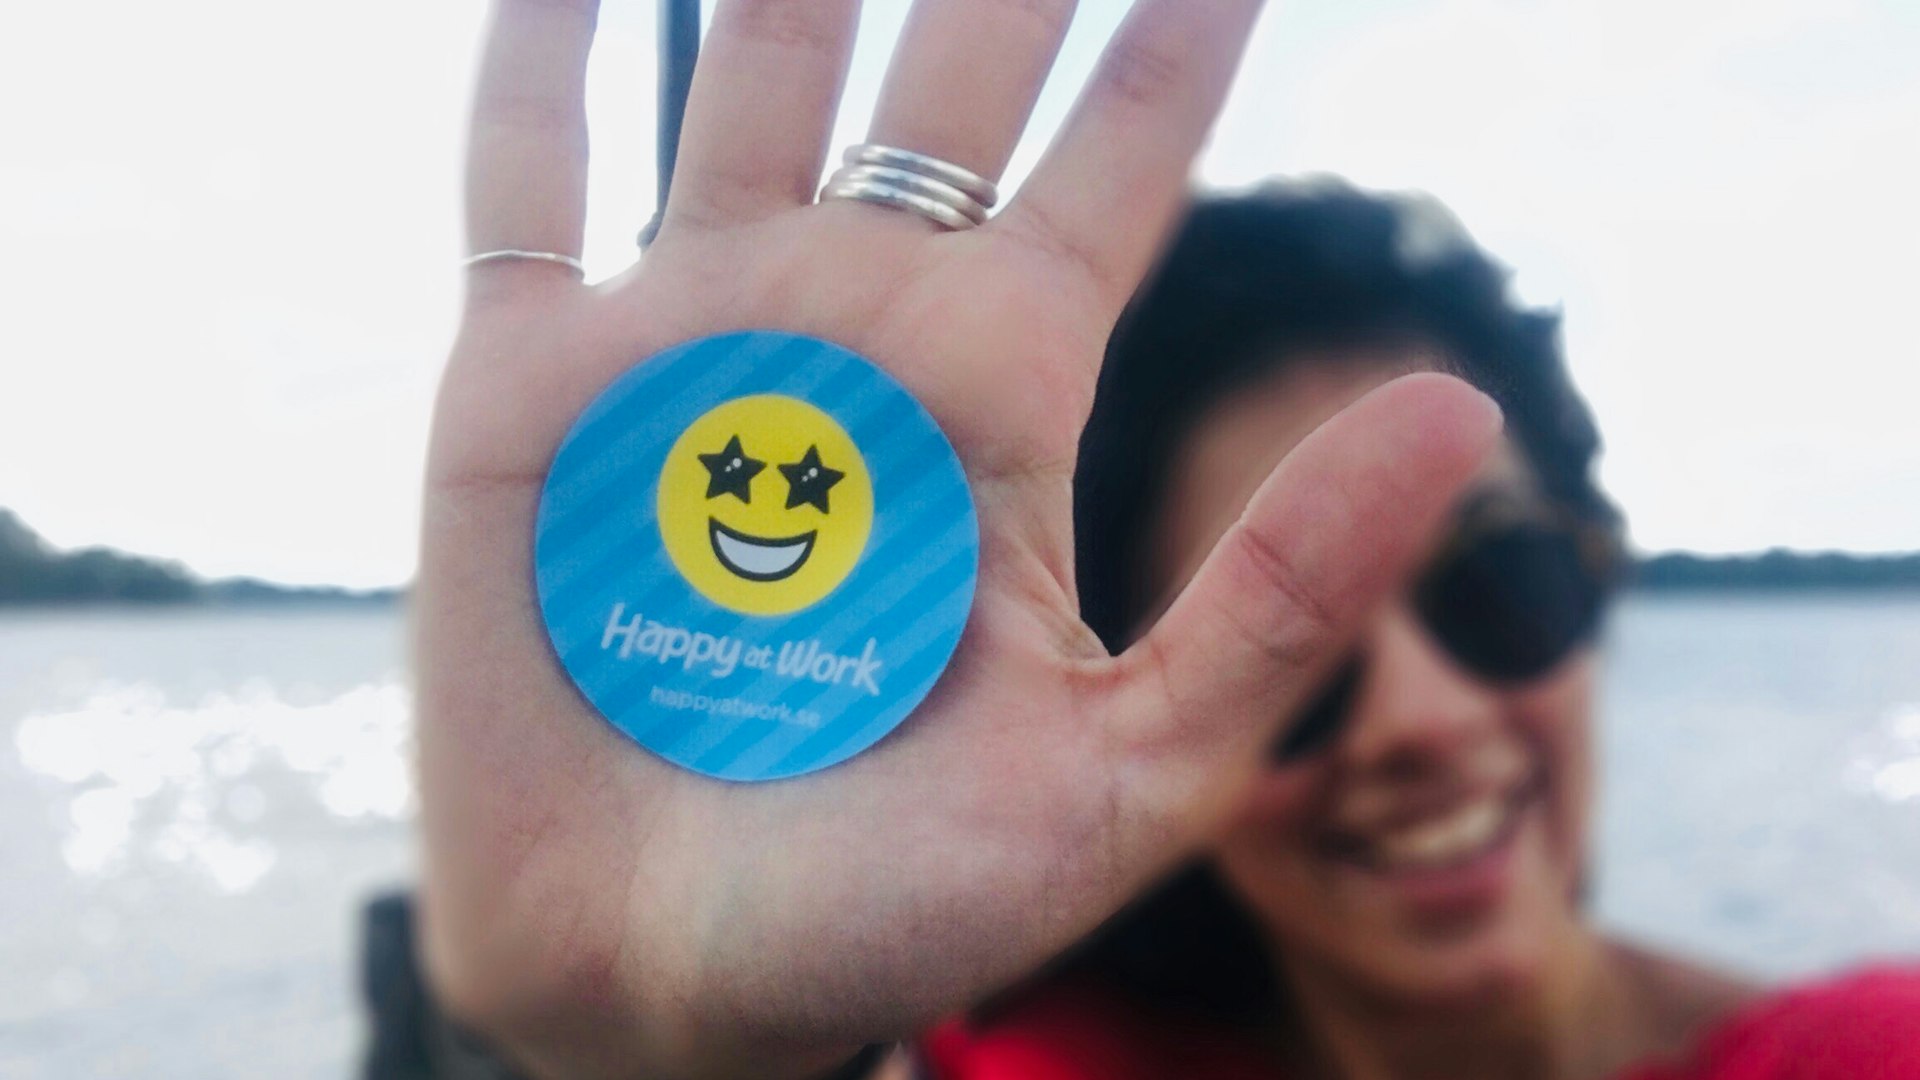 A sticker with the Happy at Work logotype attached to the palm of a hand.